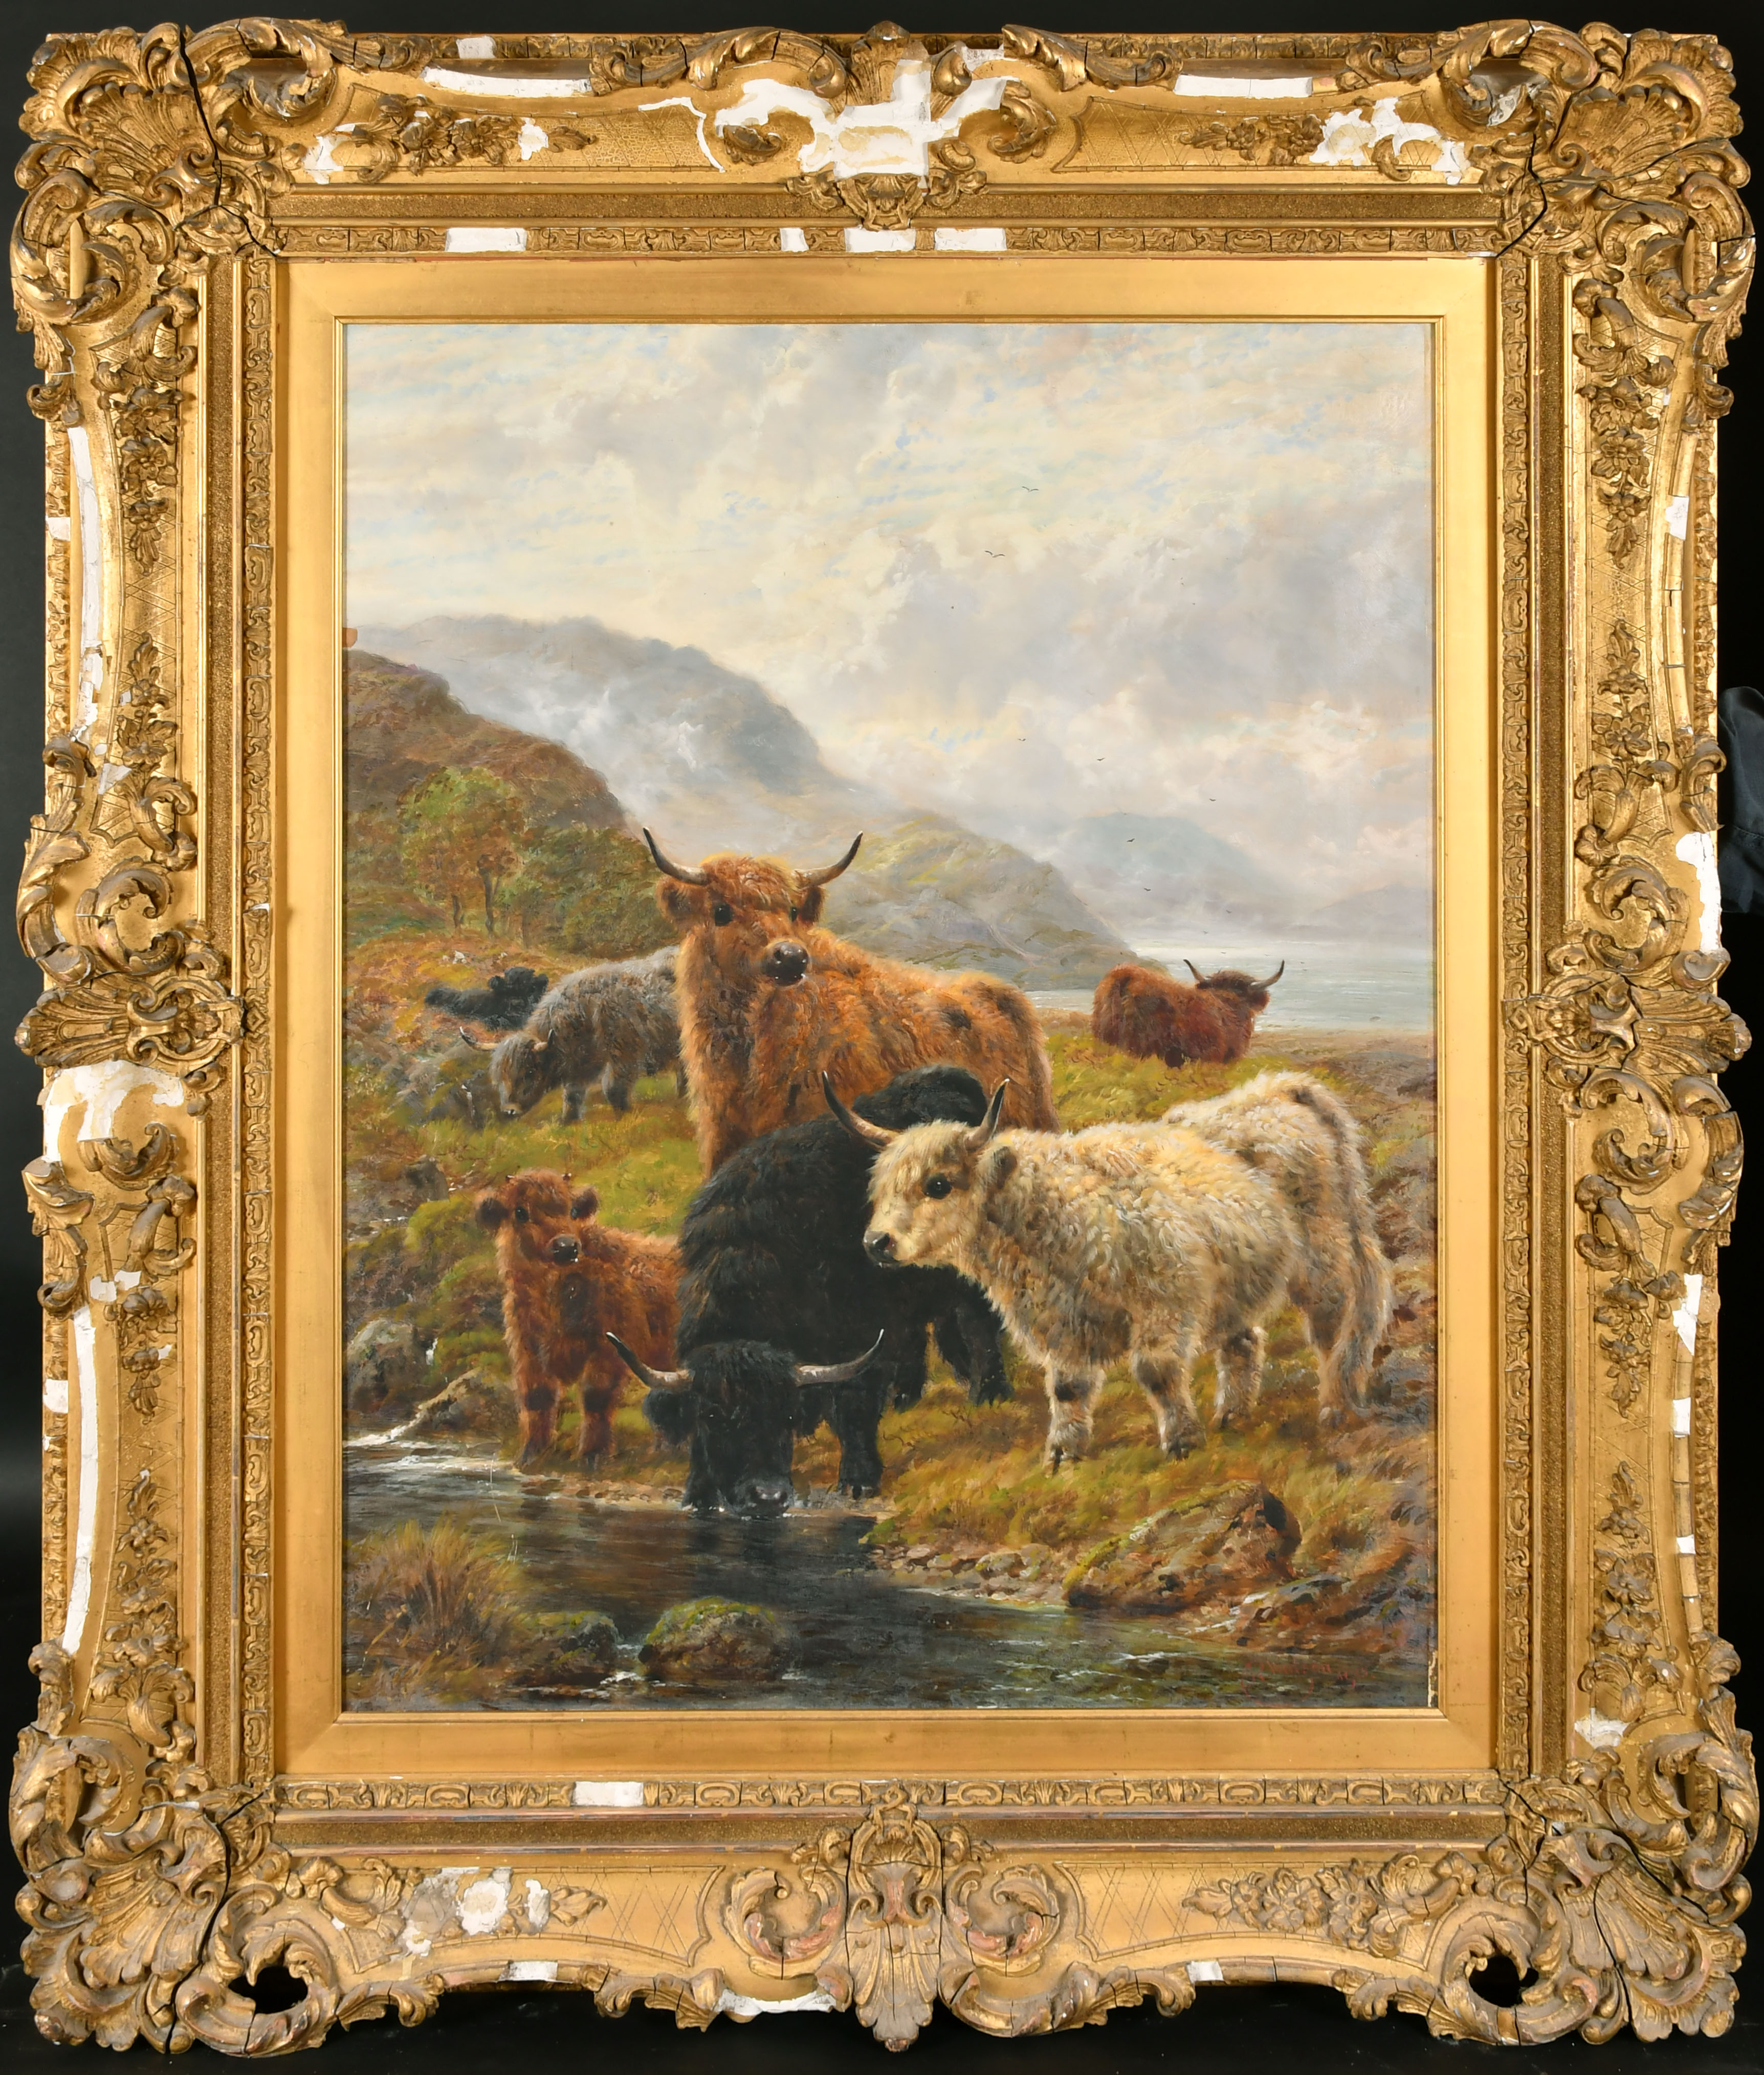 Robert Watson (1865-1916) British. Sheep in a Highland Landscape, Oil on canvas, Signed and dated - Image 3 of 7